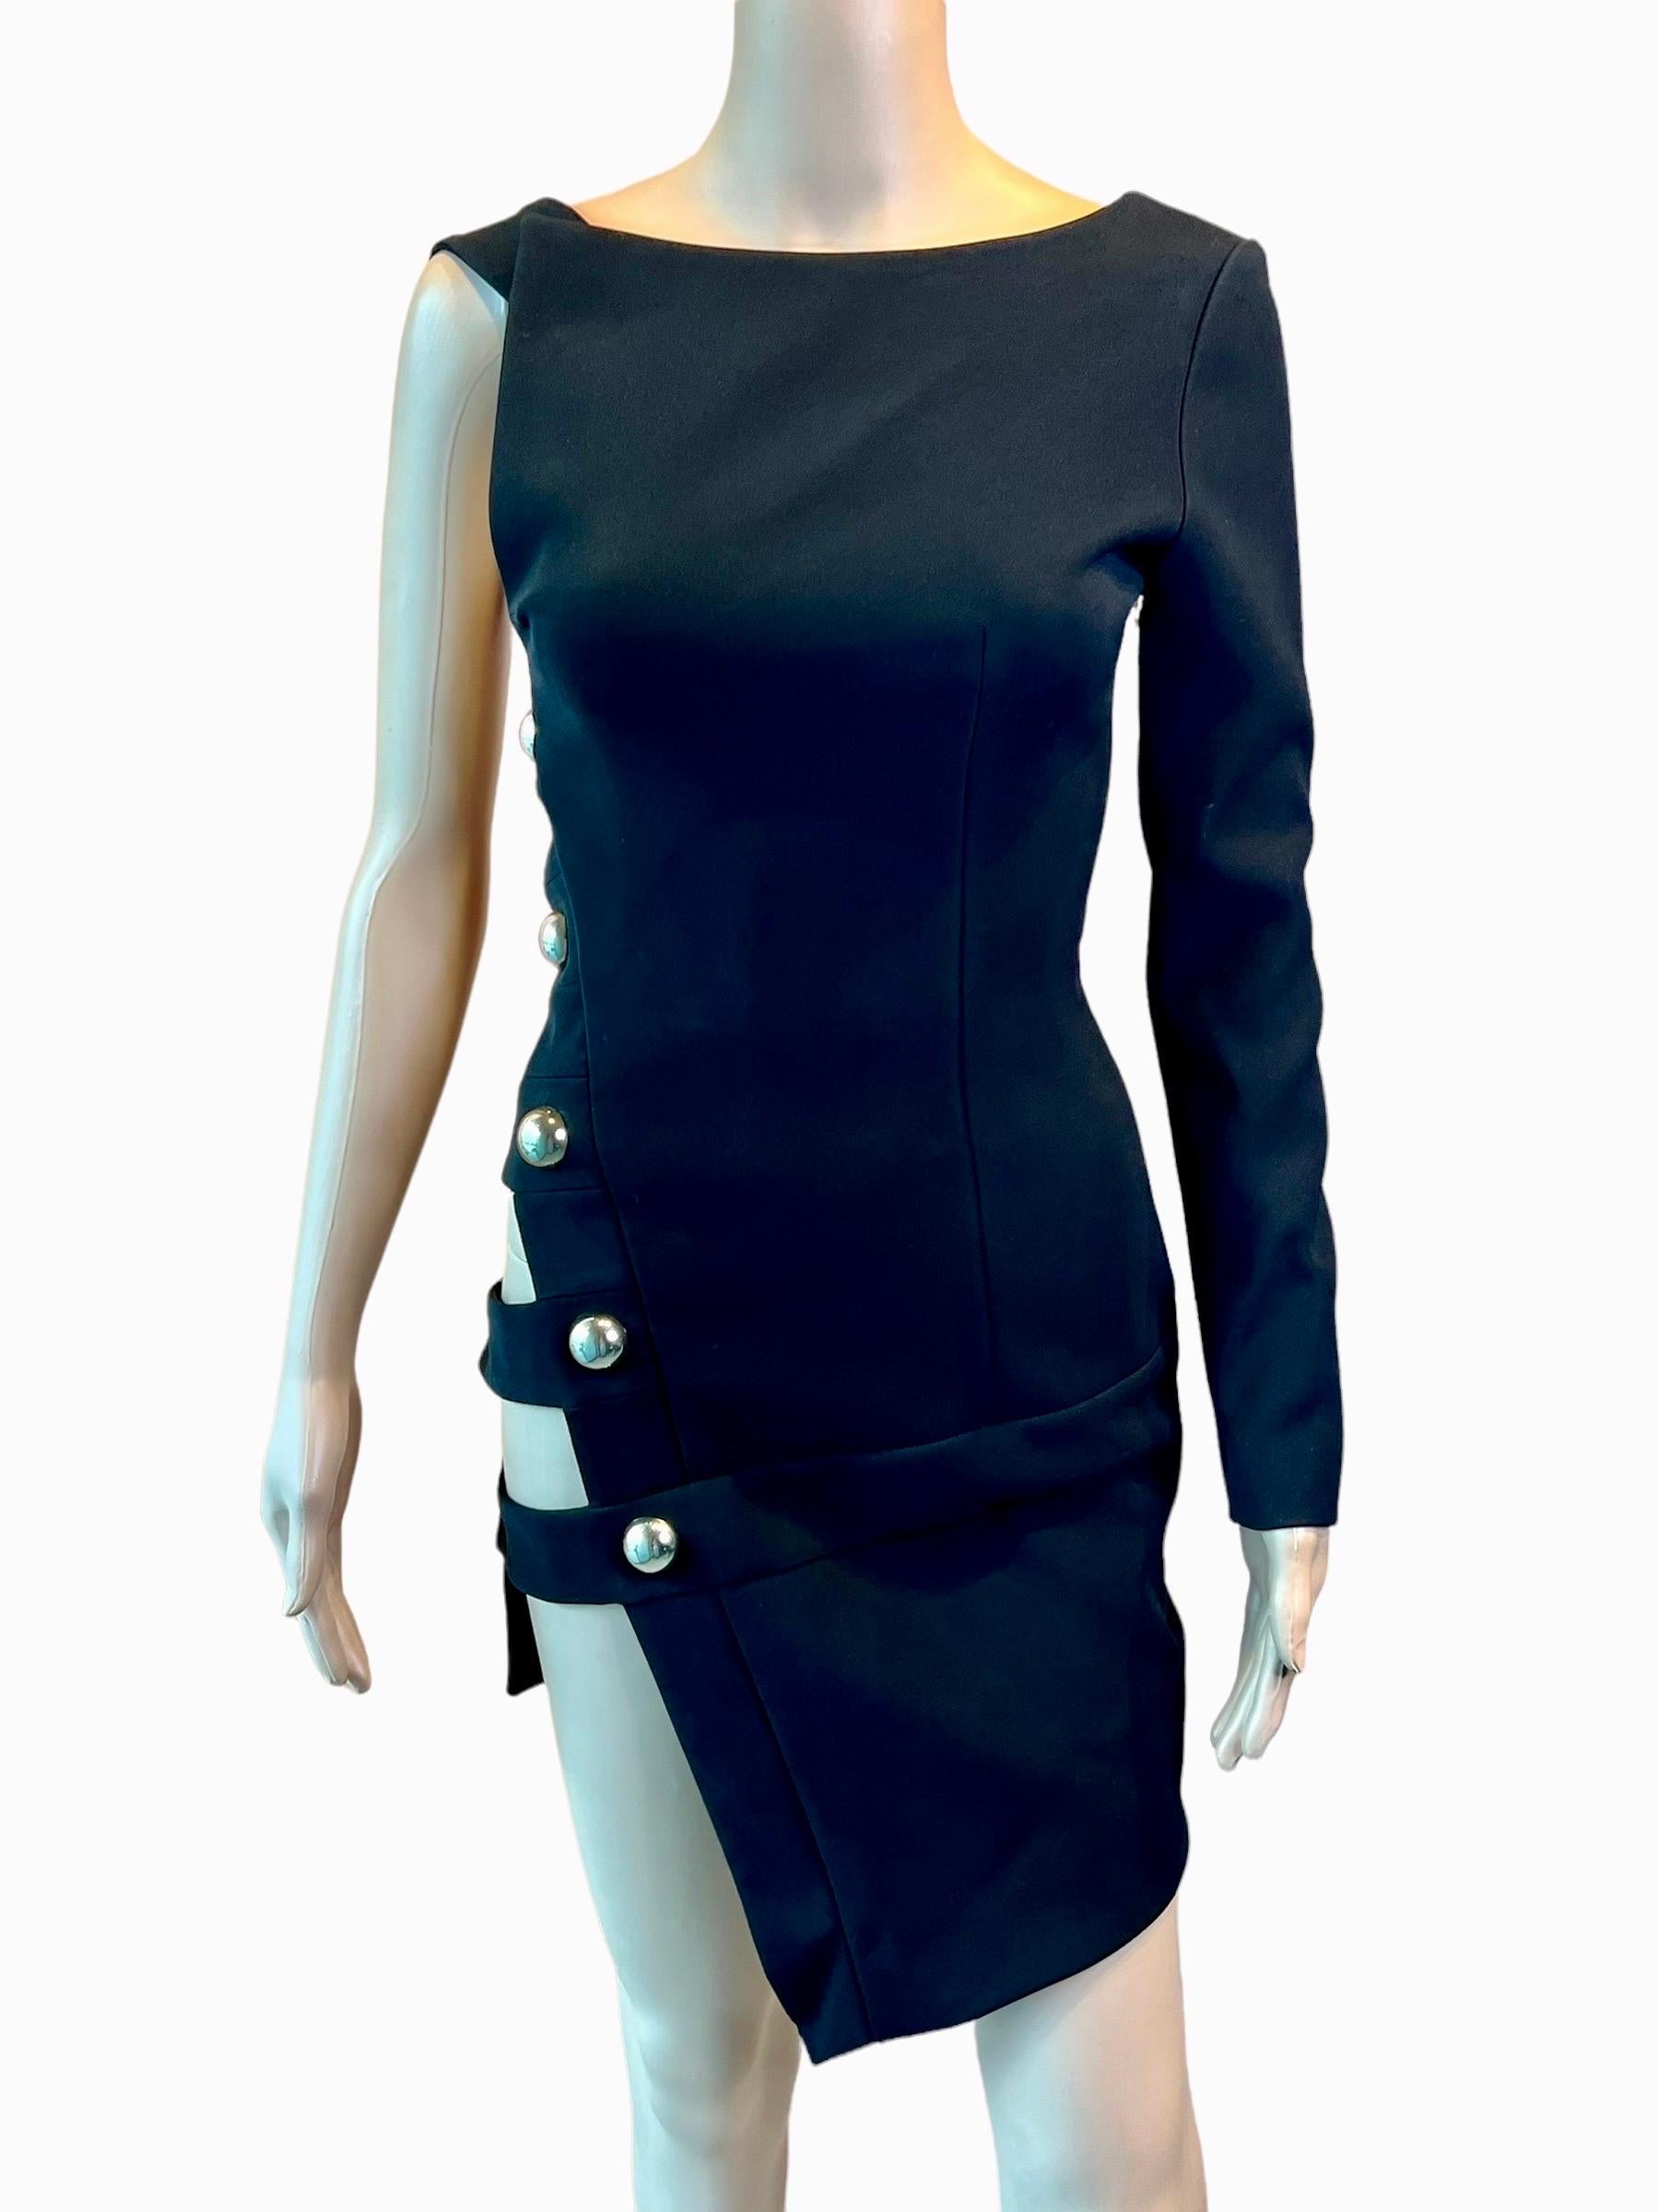 Women's Anthony Vaccarello S/S 2014 Runway Cutout One Sleeve Black Mini Dress For Sale